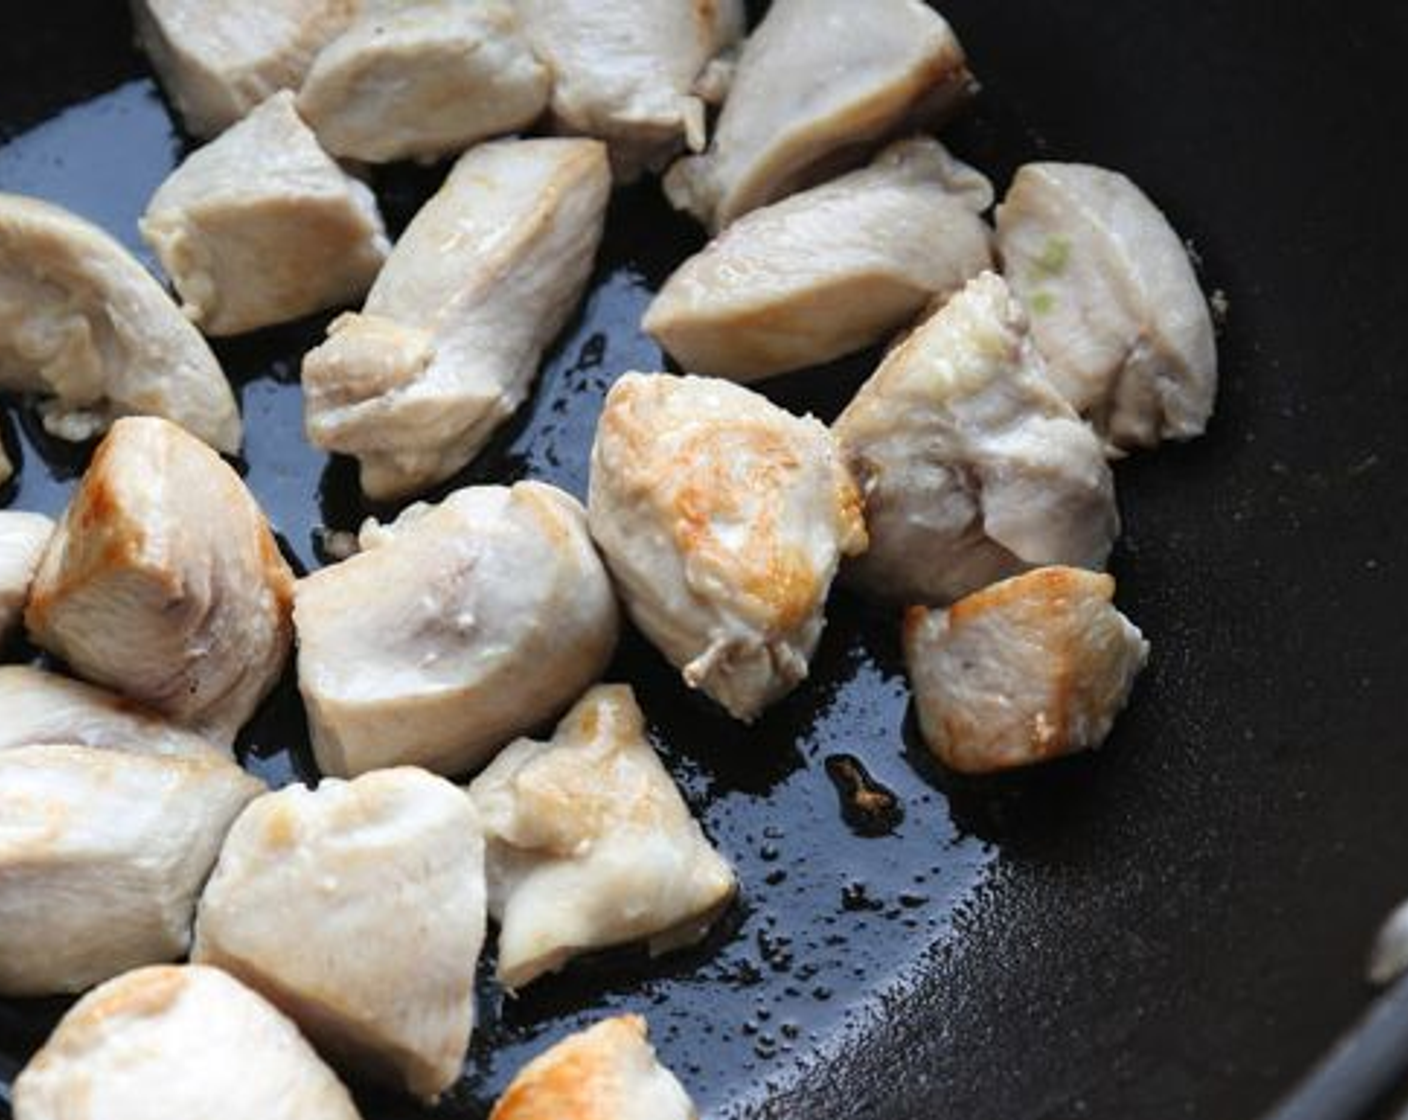 step 1 In a large nonstick skillet, melt the Coconut Oil (2 Tbsp) over medium heat. Add the Chicken Breast (1 lb) in an even layer and cook until golden brown on the first side, about 3 minutes. Flip the chicken and cook for another minute. Remove from the pan and set aside.